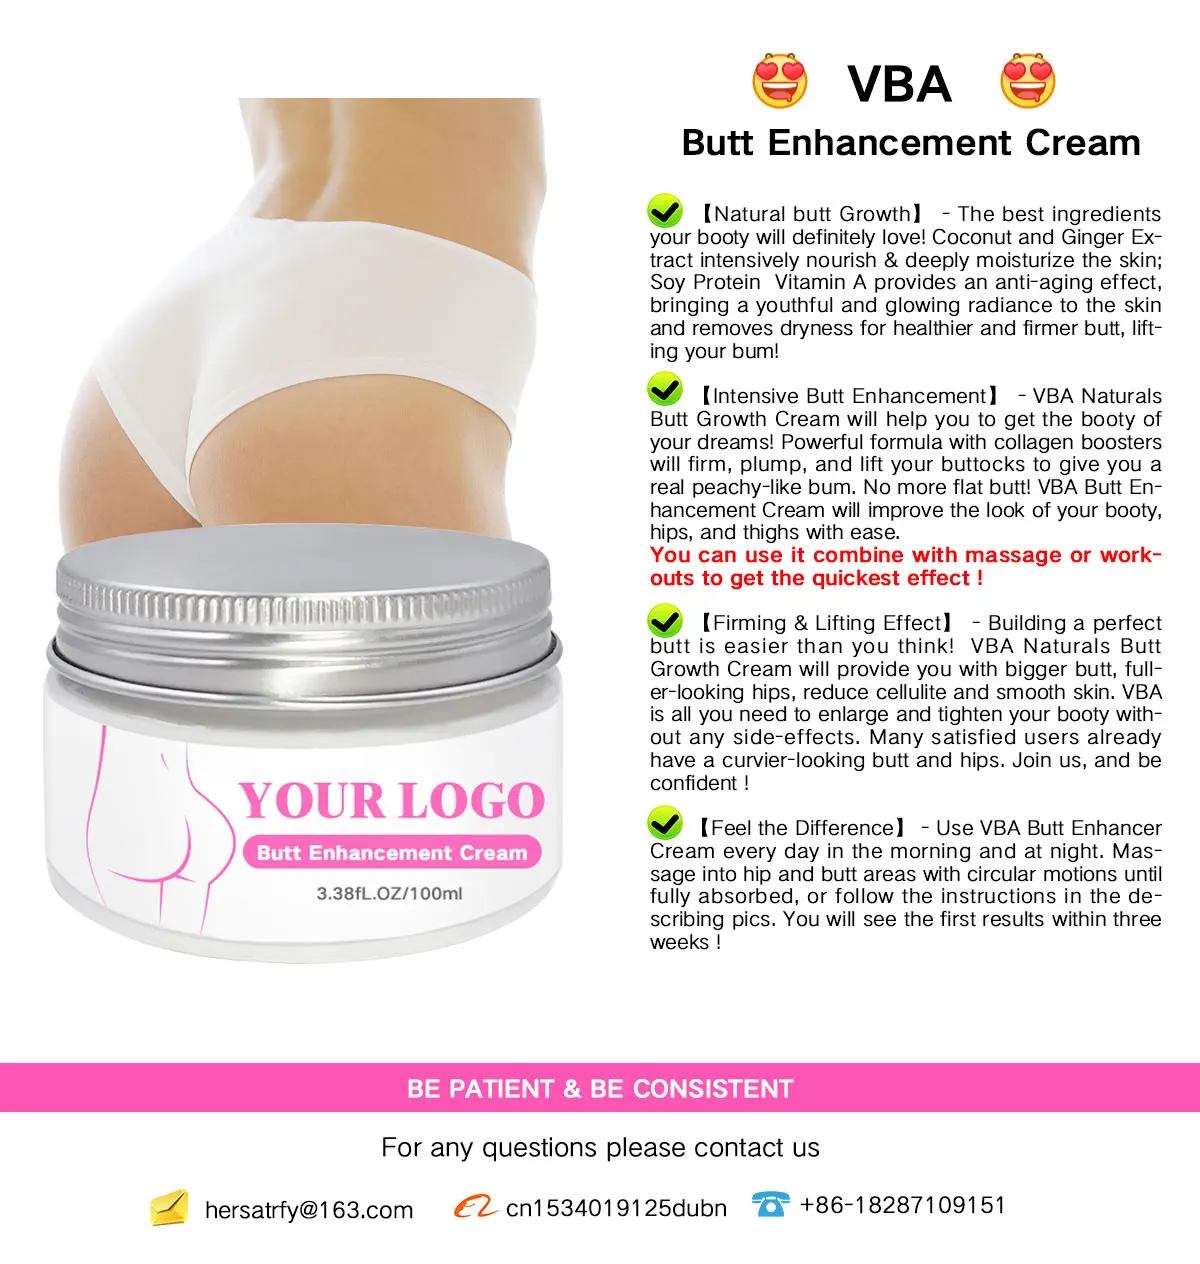 Butt Enhancement & Enlargement Cream Works for Your Buttocks Tightened and More Elastic Without Injections - Lift Up Butt Cream